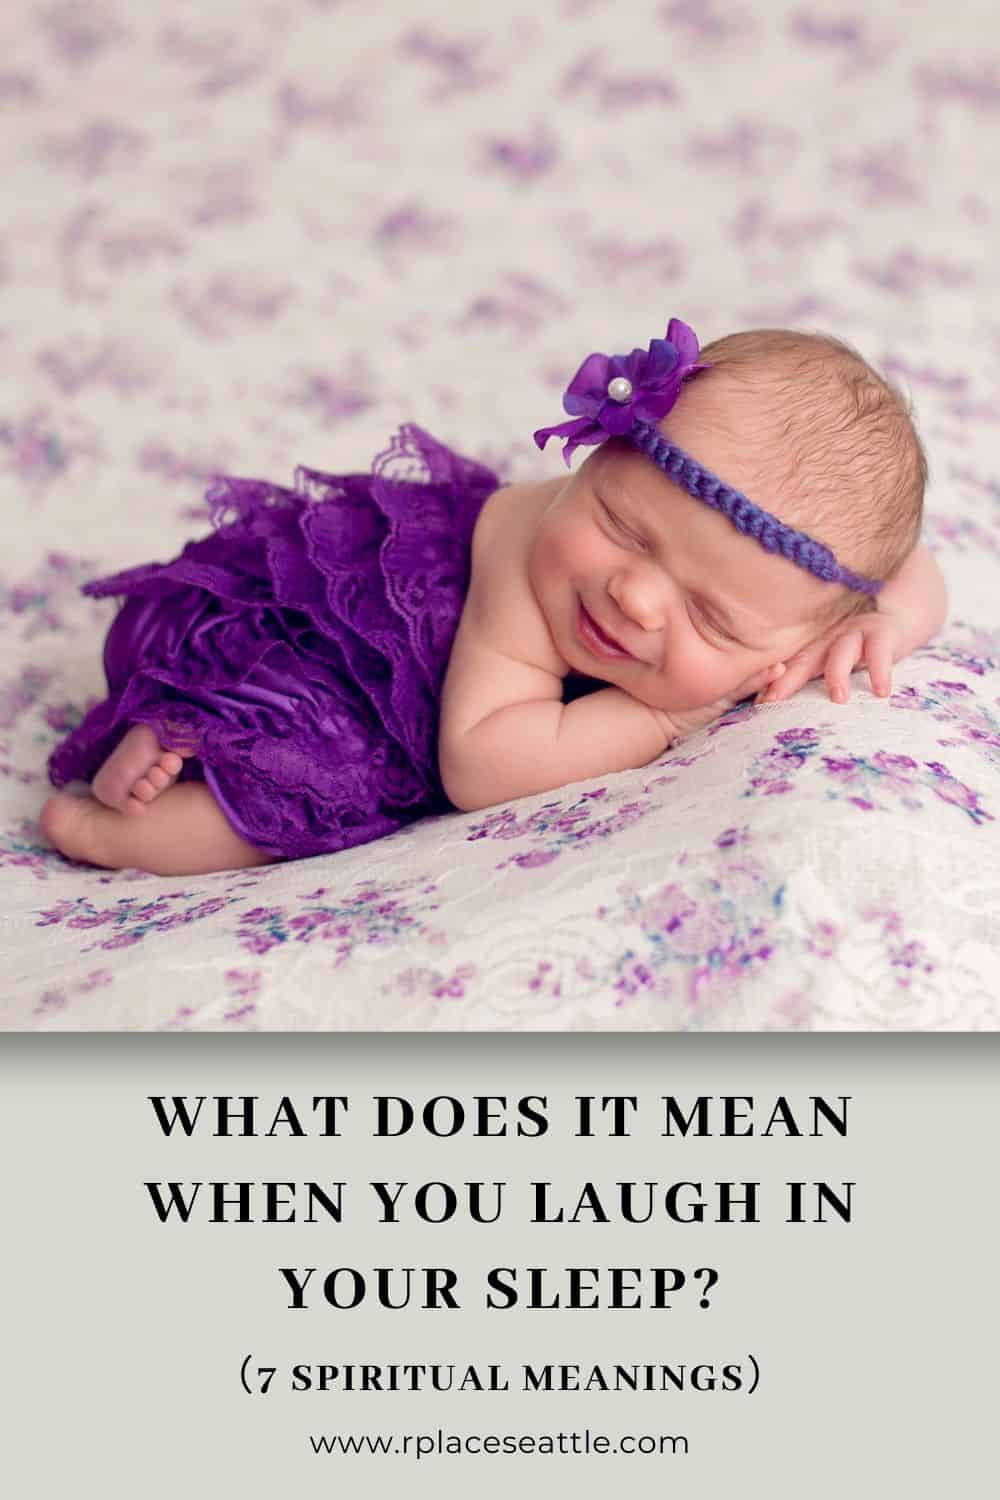 The science behind laughing in your sleep